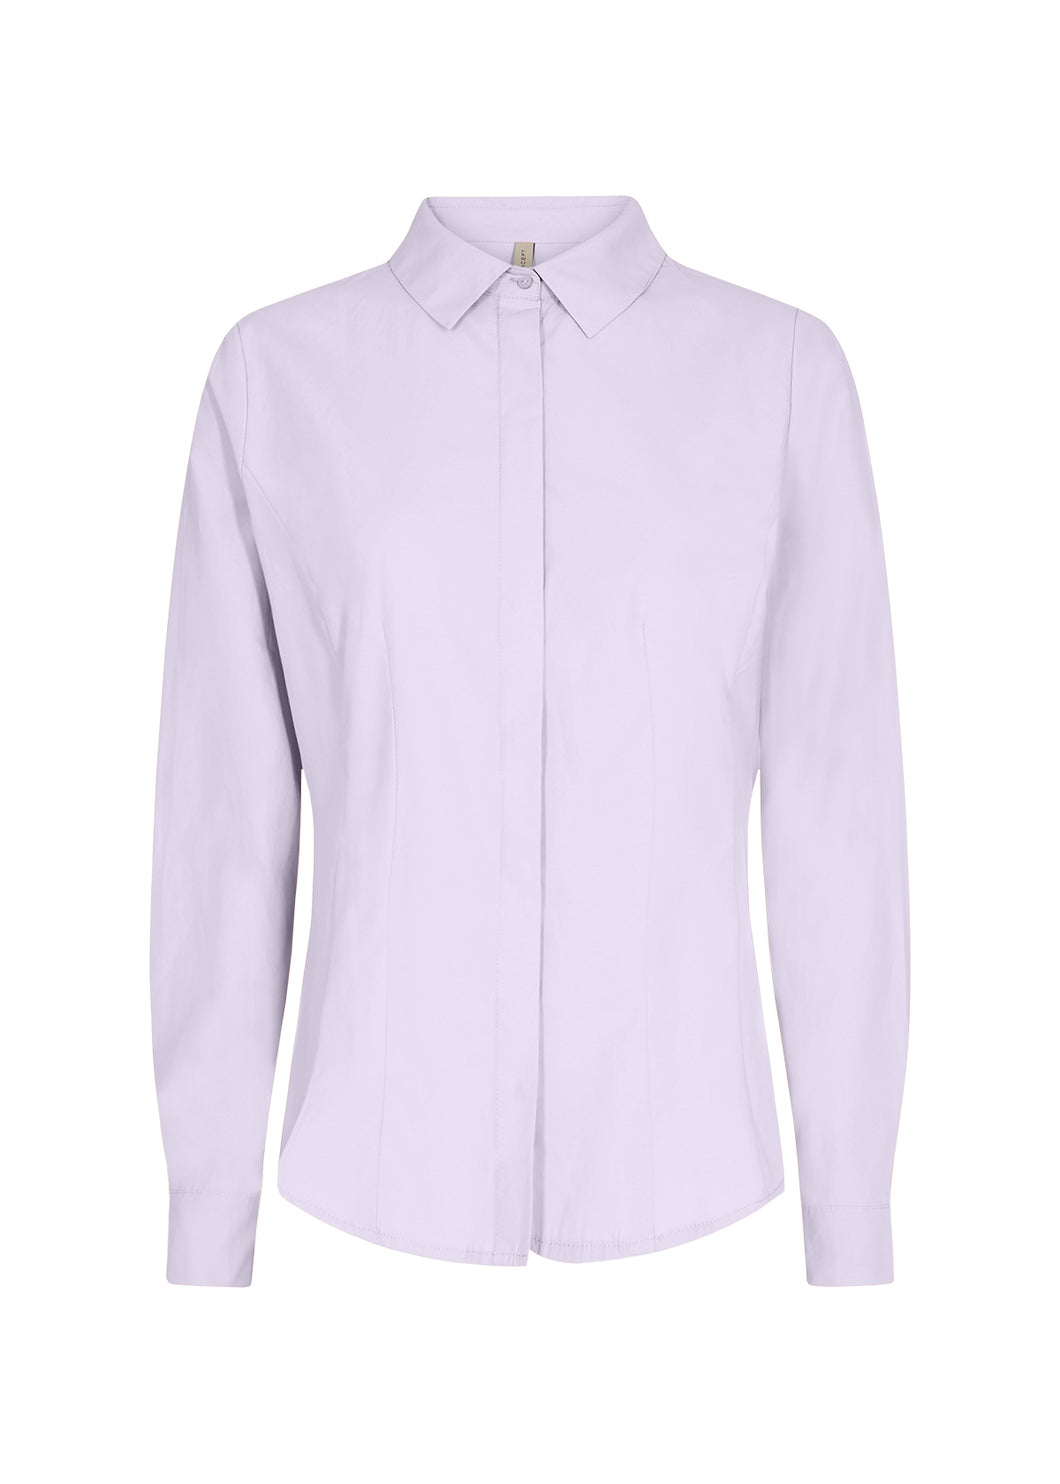 Soya Concept - Blouse - Lilas - 3Ps17500